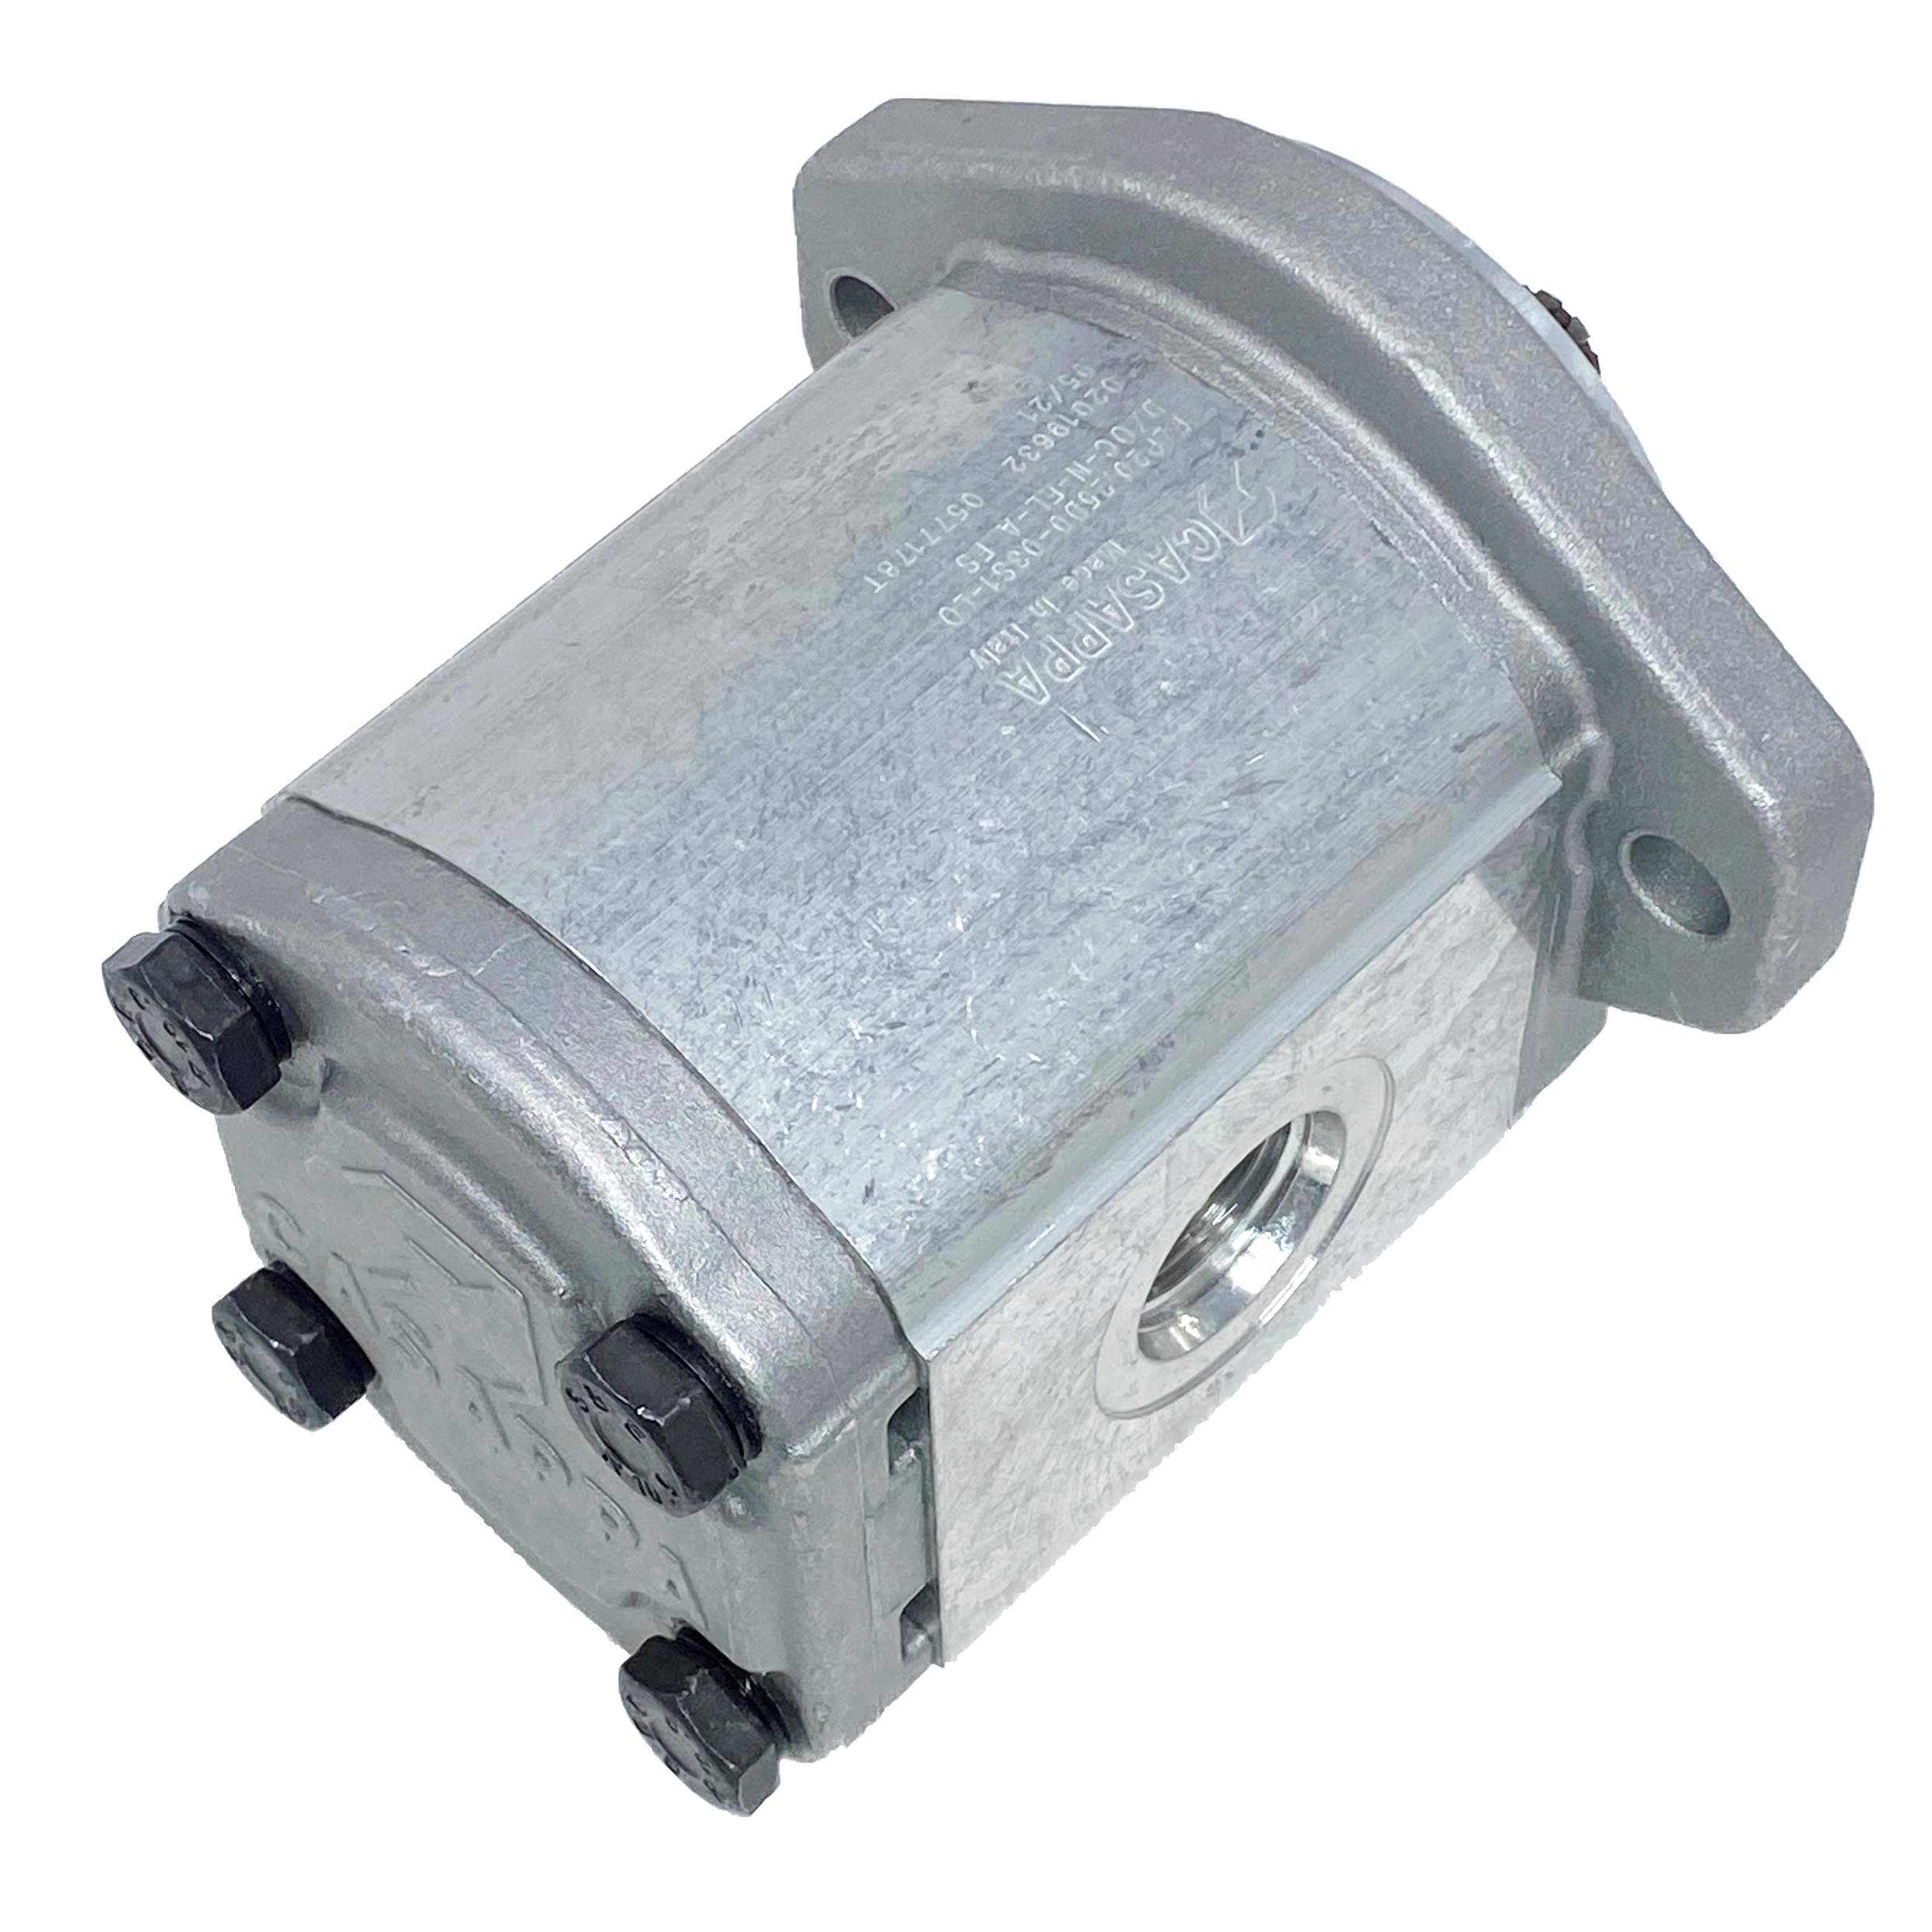 PHM20.25B0-07S9-LOC/OG-N-EL : Casappa Polaris Gear Motor, 26.42cc, 3335psi Rated, 3000RPM, Reversible Interior Drain, 11T 16/32dp Shaft, SAE A 2-Bolt Flange, 0.625 (5/8") #10 SAE Inlet, 1.25" #20 SAE Outlet, Cast Iron Body, Aluminum Flange